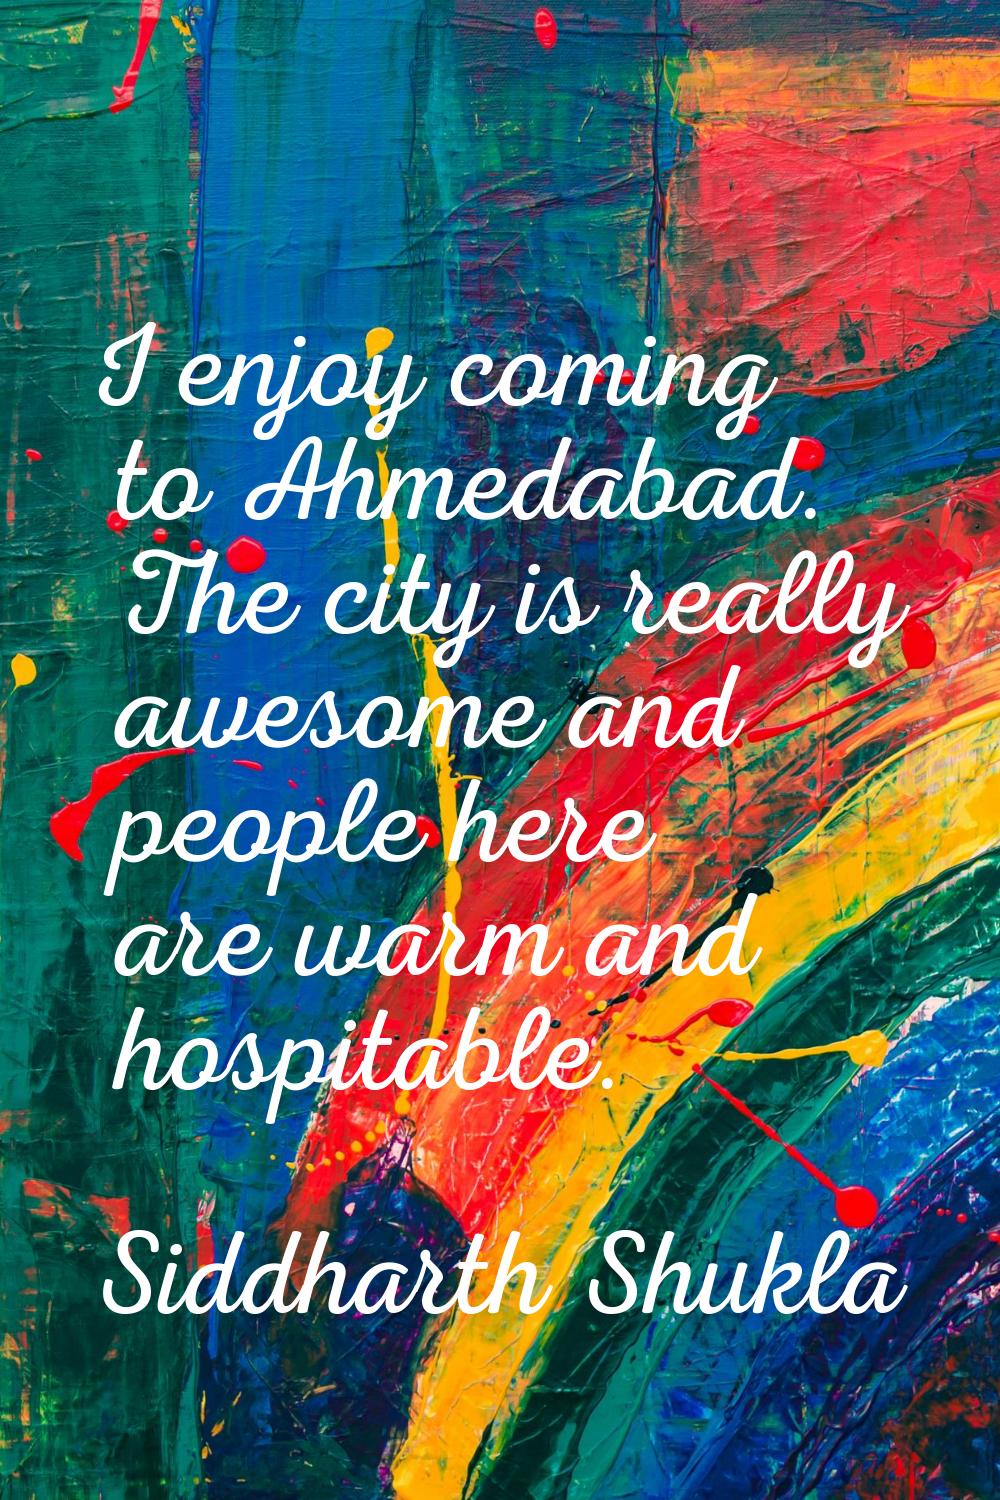 I enjoy coming to Ahmedabad. The city is really awesome and people here are warm and hospitable.